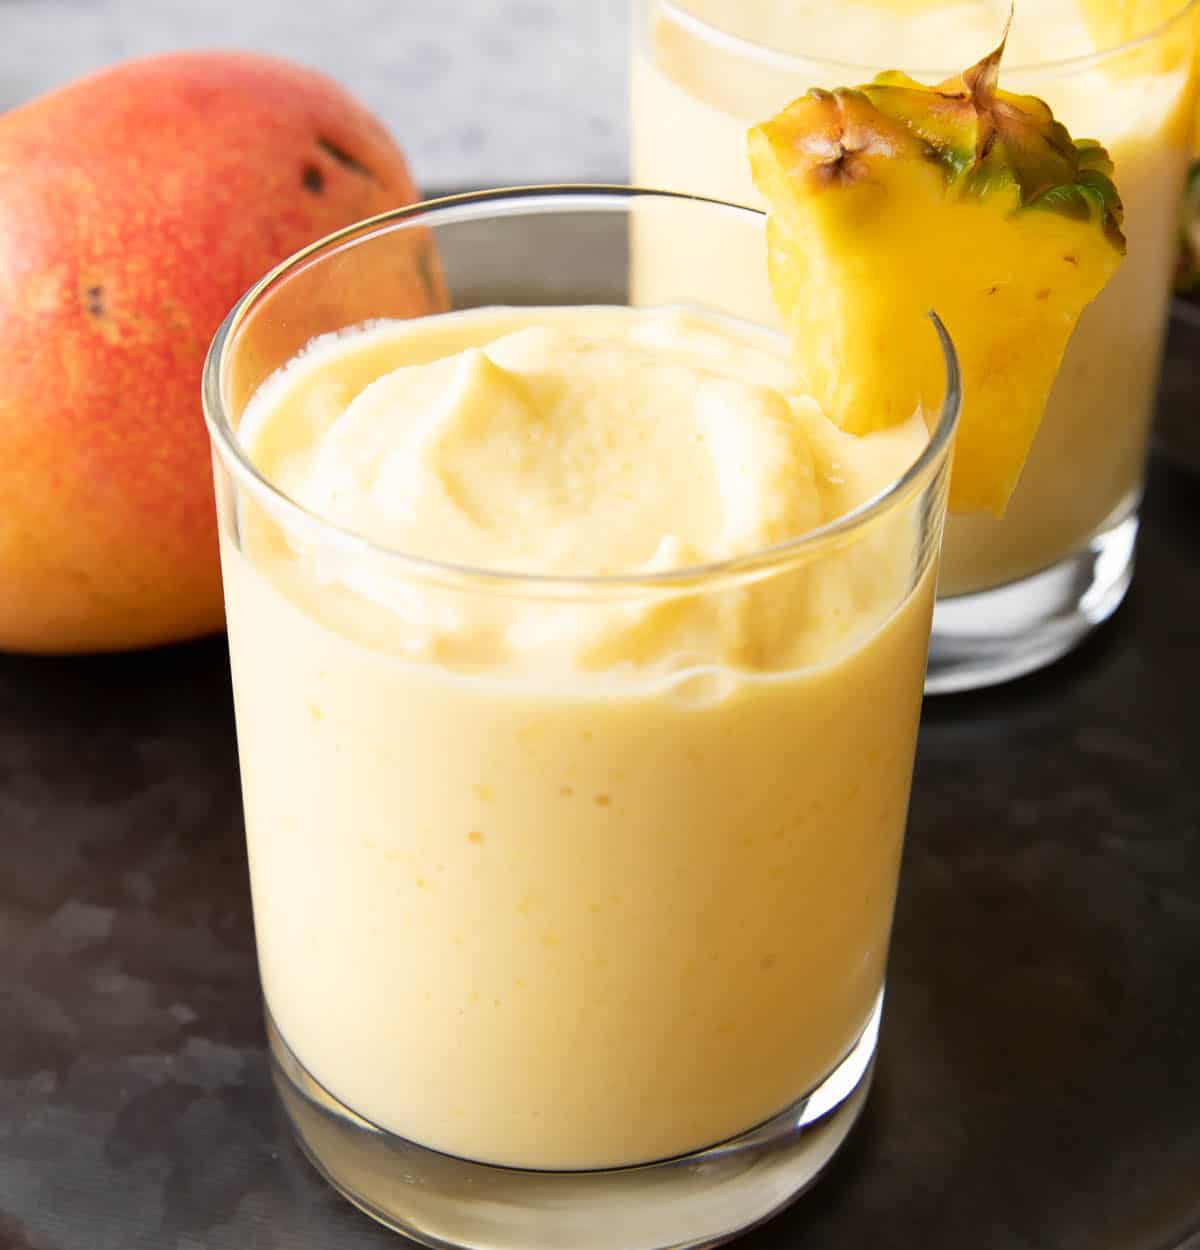 Close up of the thick, creamy smooth texture of this Mango Pineapple Smoothie